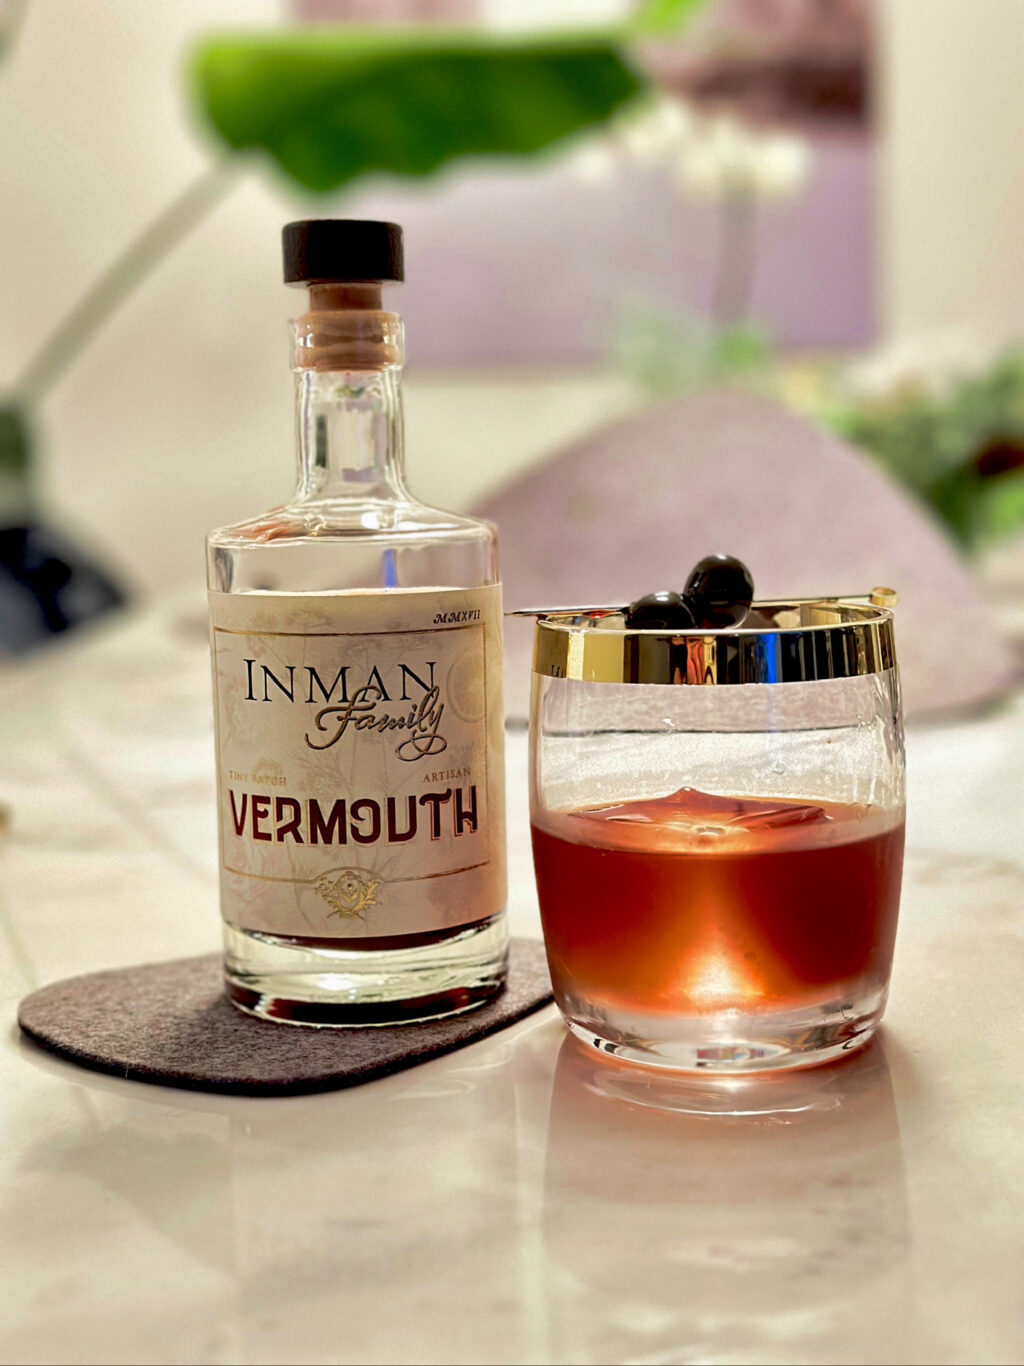 Cocktail enthusiast Gabe Monheimer recently featured Inman Familys vermouth in a recent Instagram post. Credit: @BarMonheimer / Instagram